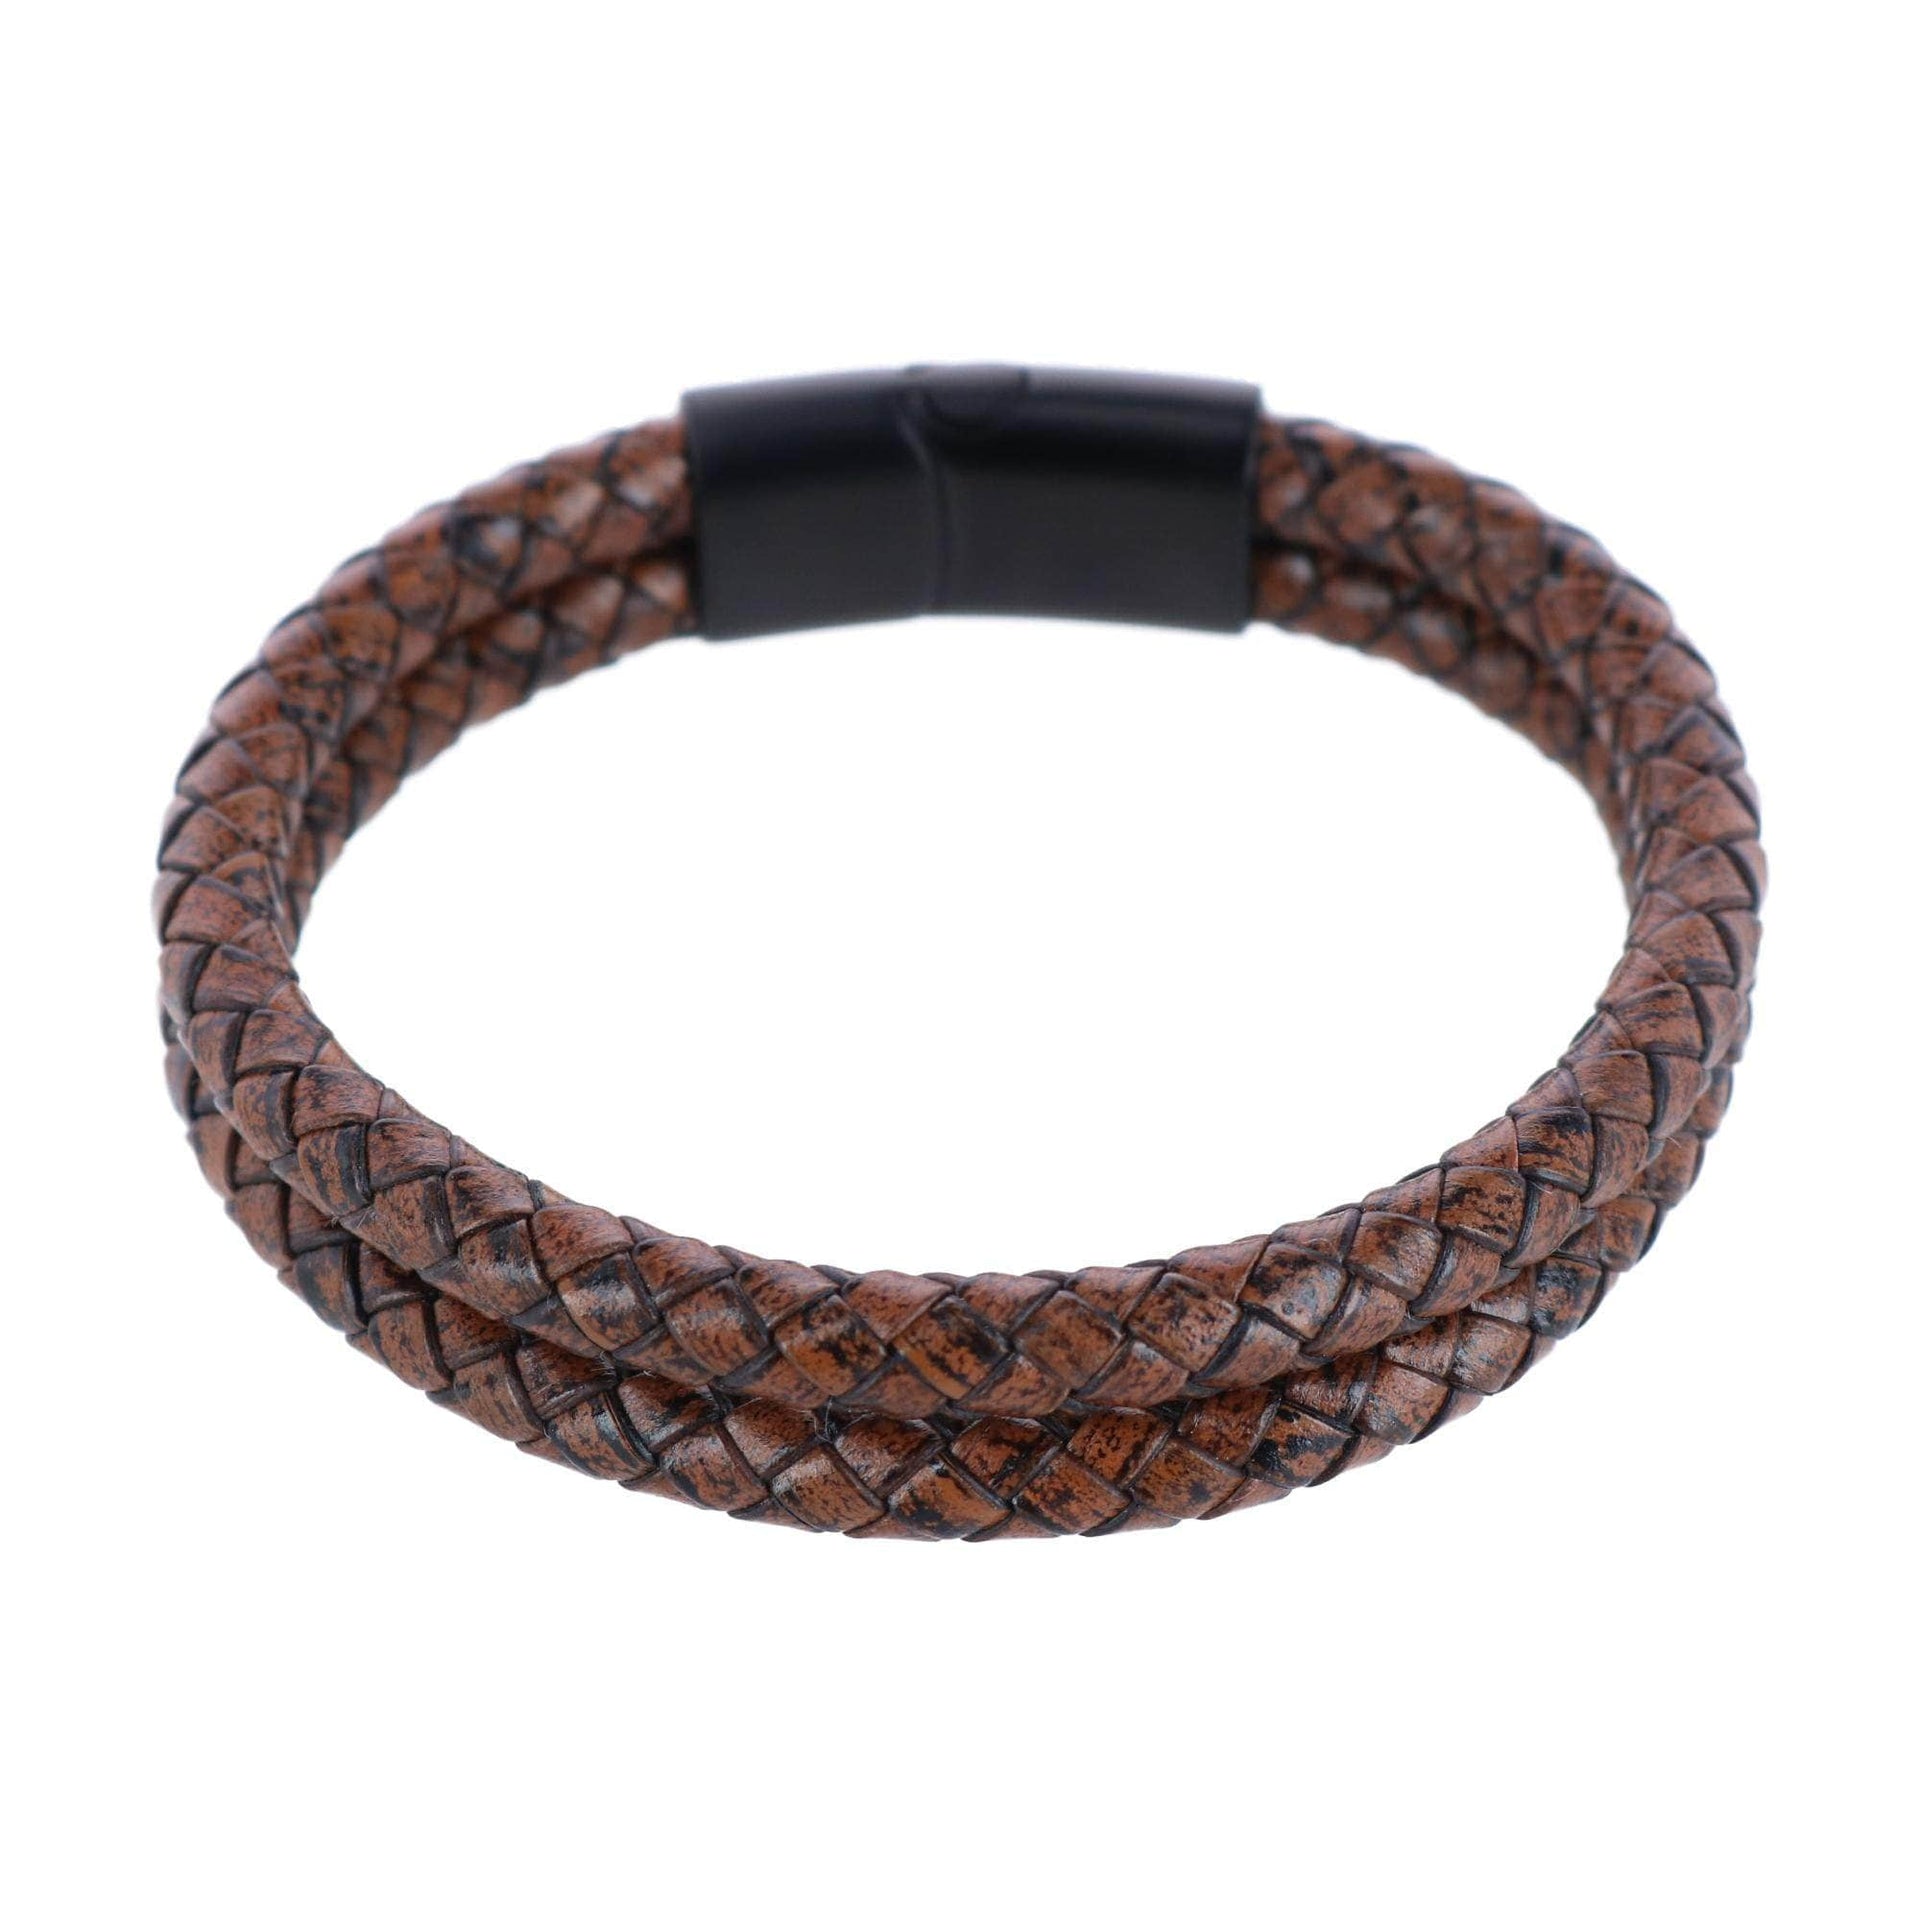 Simple Double Band Braided Secure Clasp Leather Bracelet by Trafalgar Men's  Accessories